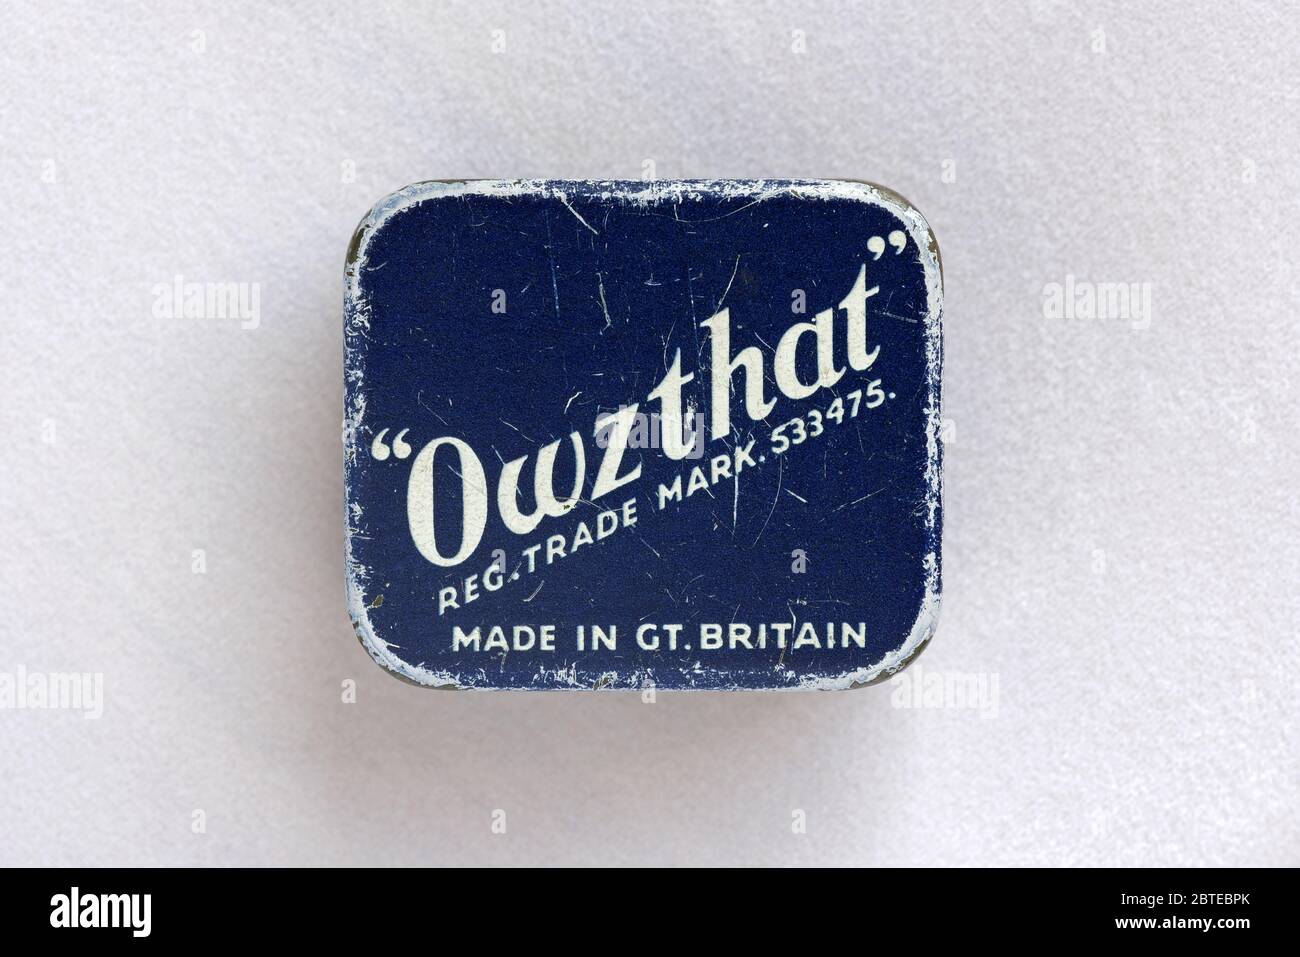 Close up image of the tin containing the vintage Cricket game Owzthat circa 1940's - 1950's Stock Photo